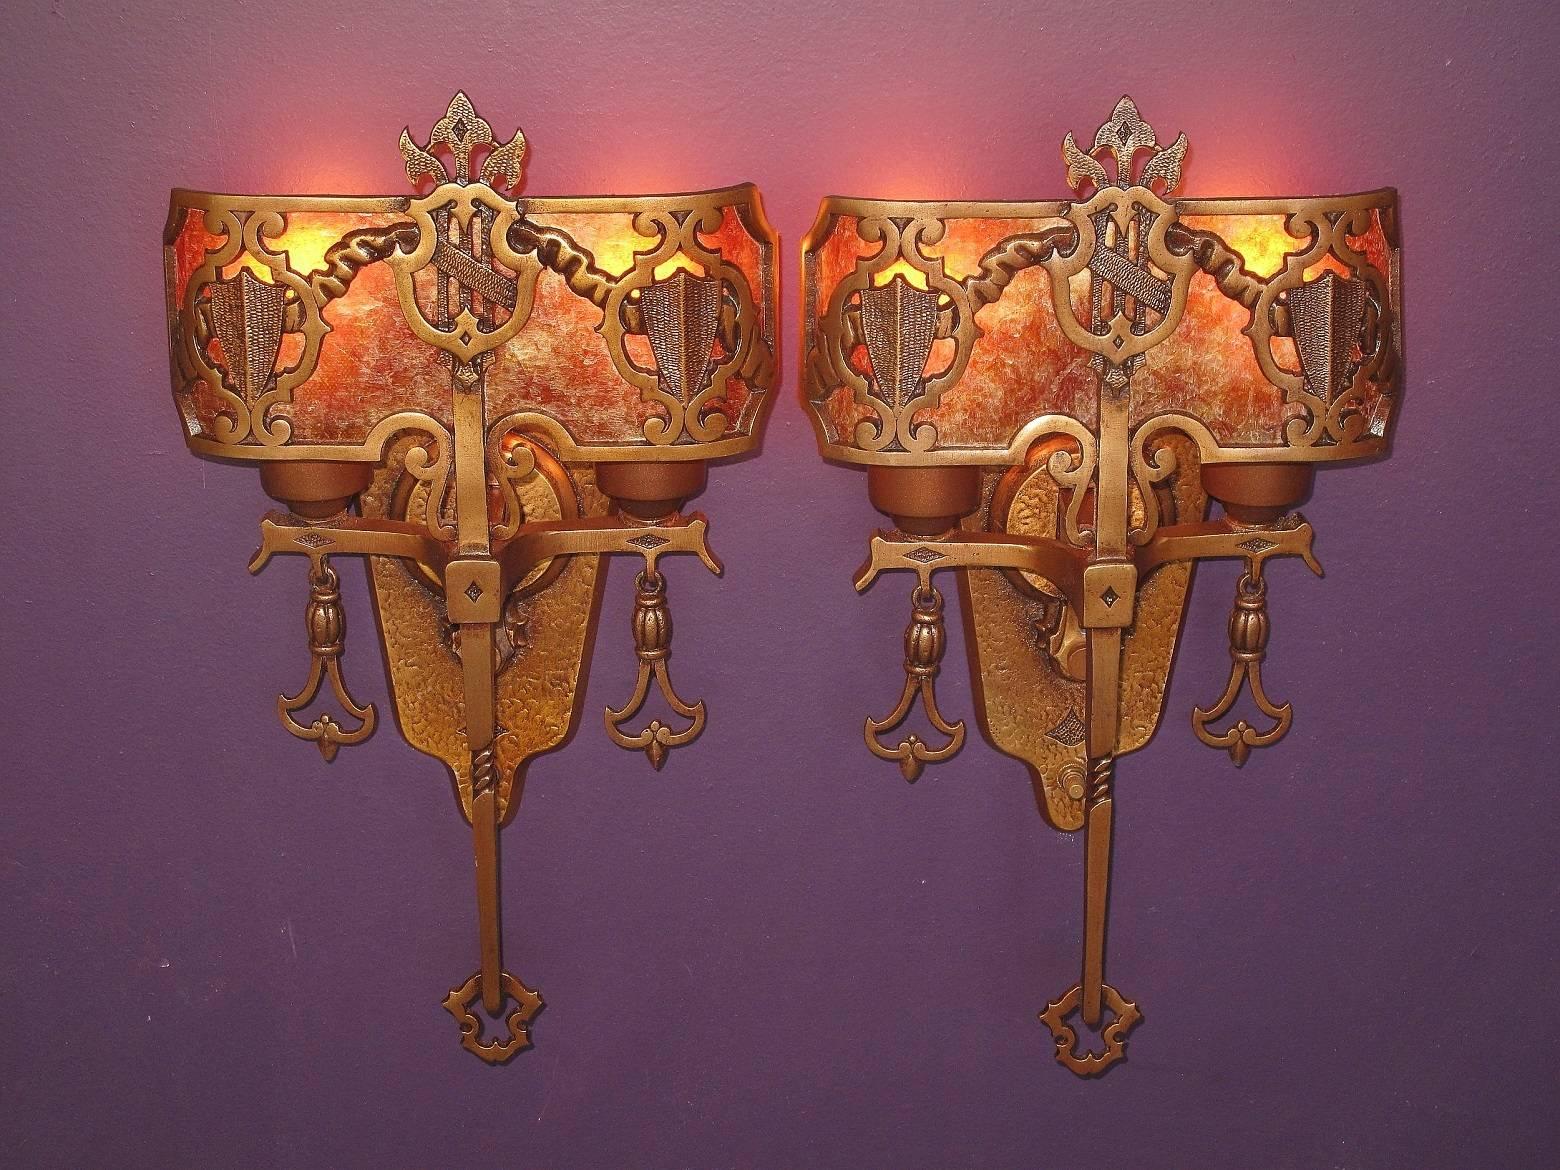 Solid bronze two bulb Tudor/Spanish Revival style vintage, 1920s wall sconces. Renewed finish and light bulbs have a new amber mica shade. Nice complement to any Spanish Revival or Tudor home.
Measures: Height 15 1/4 inches.
Width 8 1/2